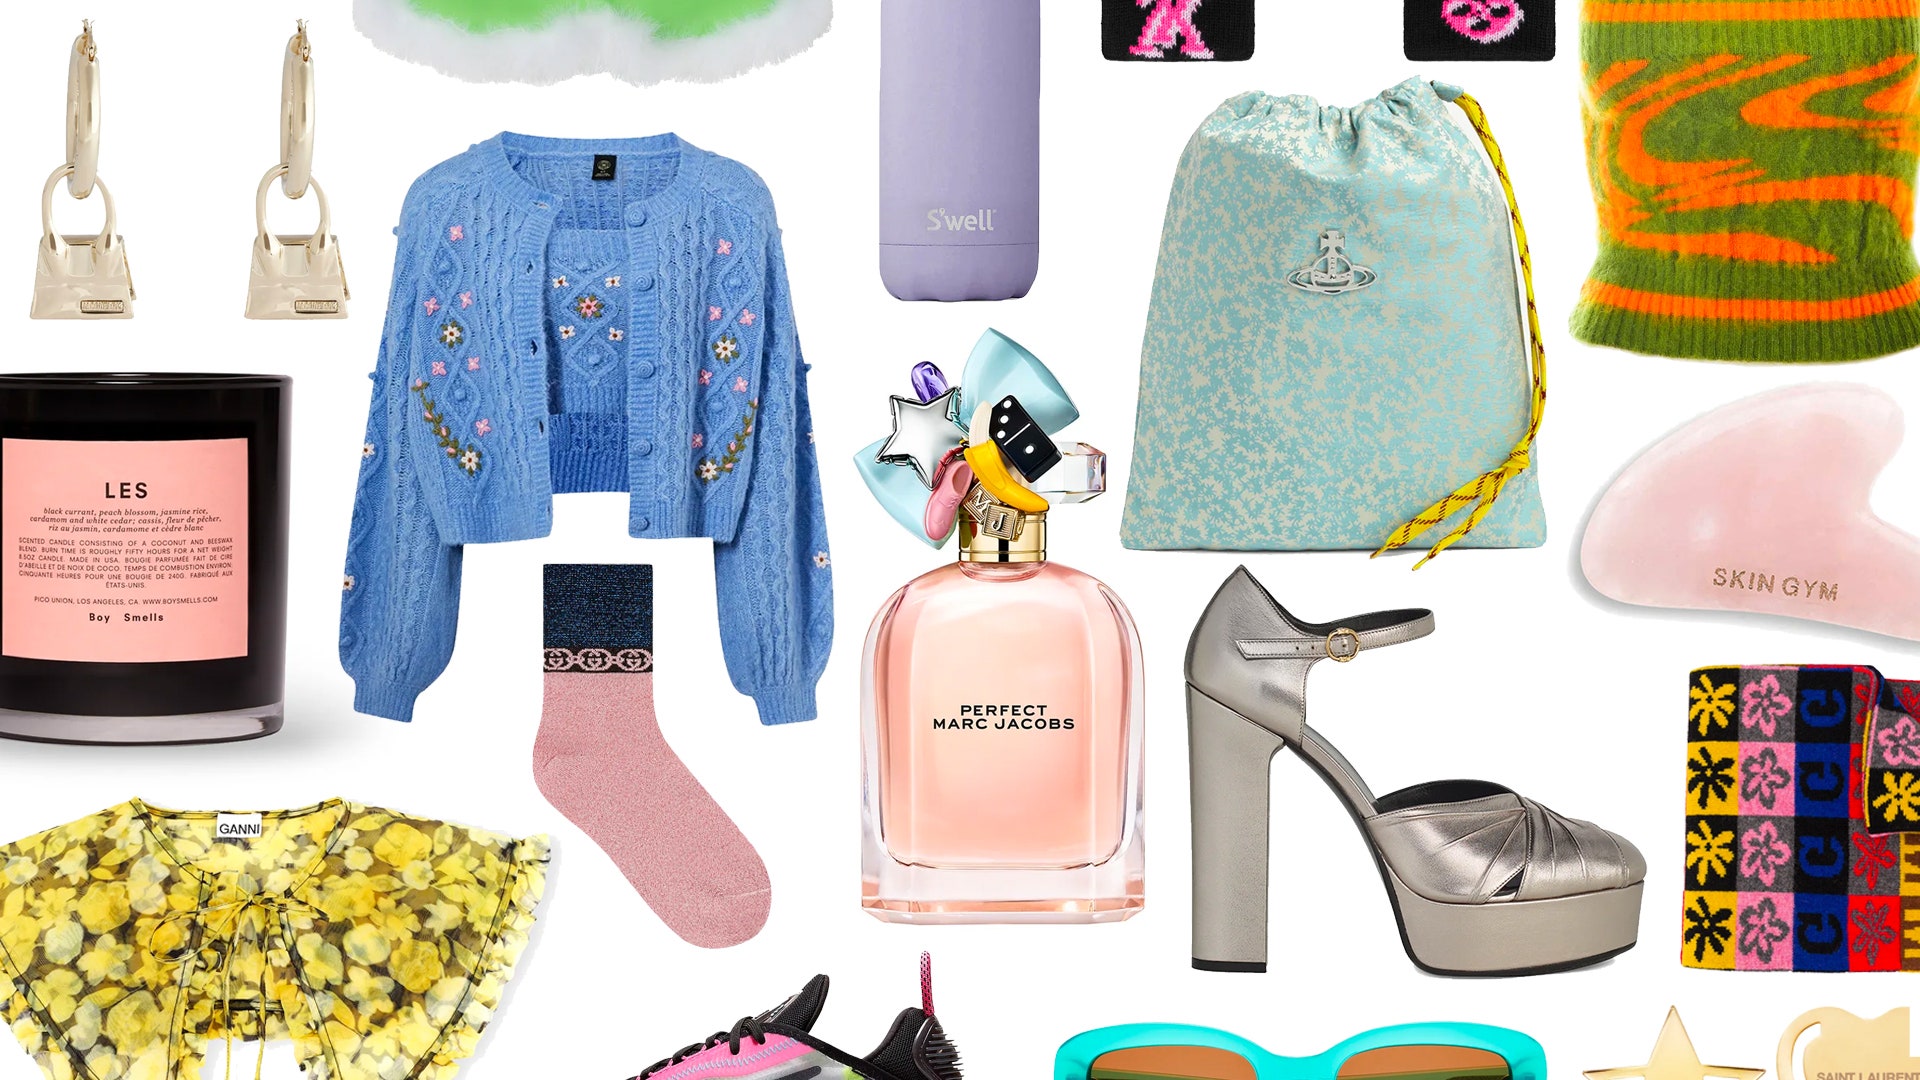 23 Best Christmas Gift Ideas For Teenage Girl She Will Obsess Ove